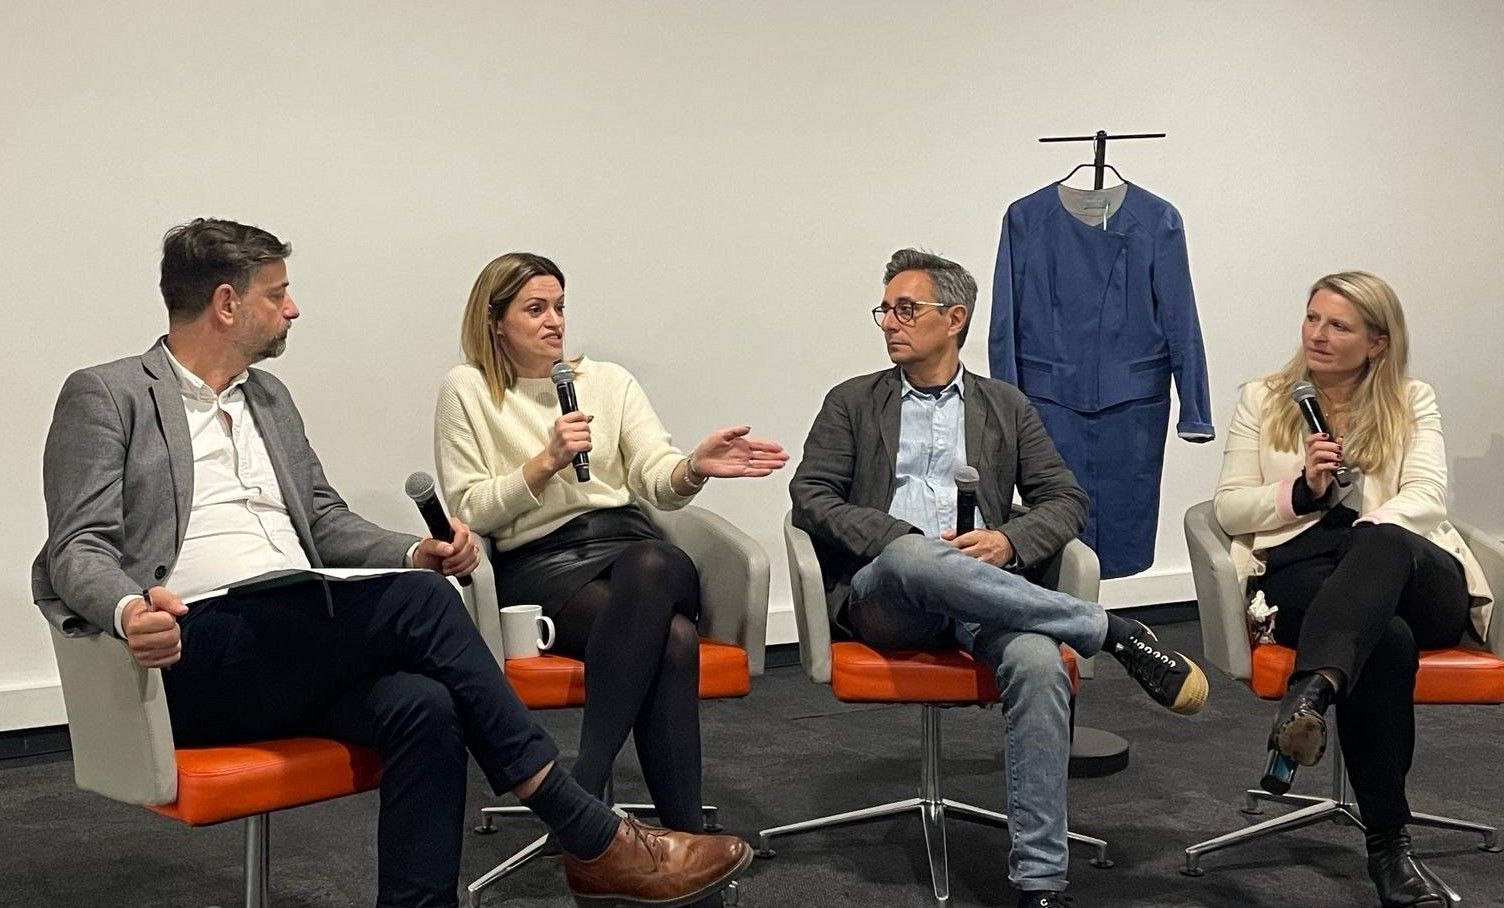 Paths to more responsible retail discussed at B Corp forum